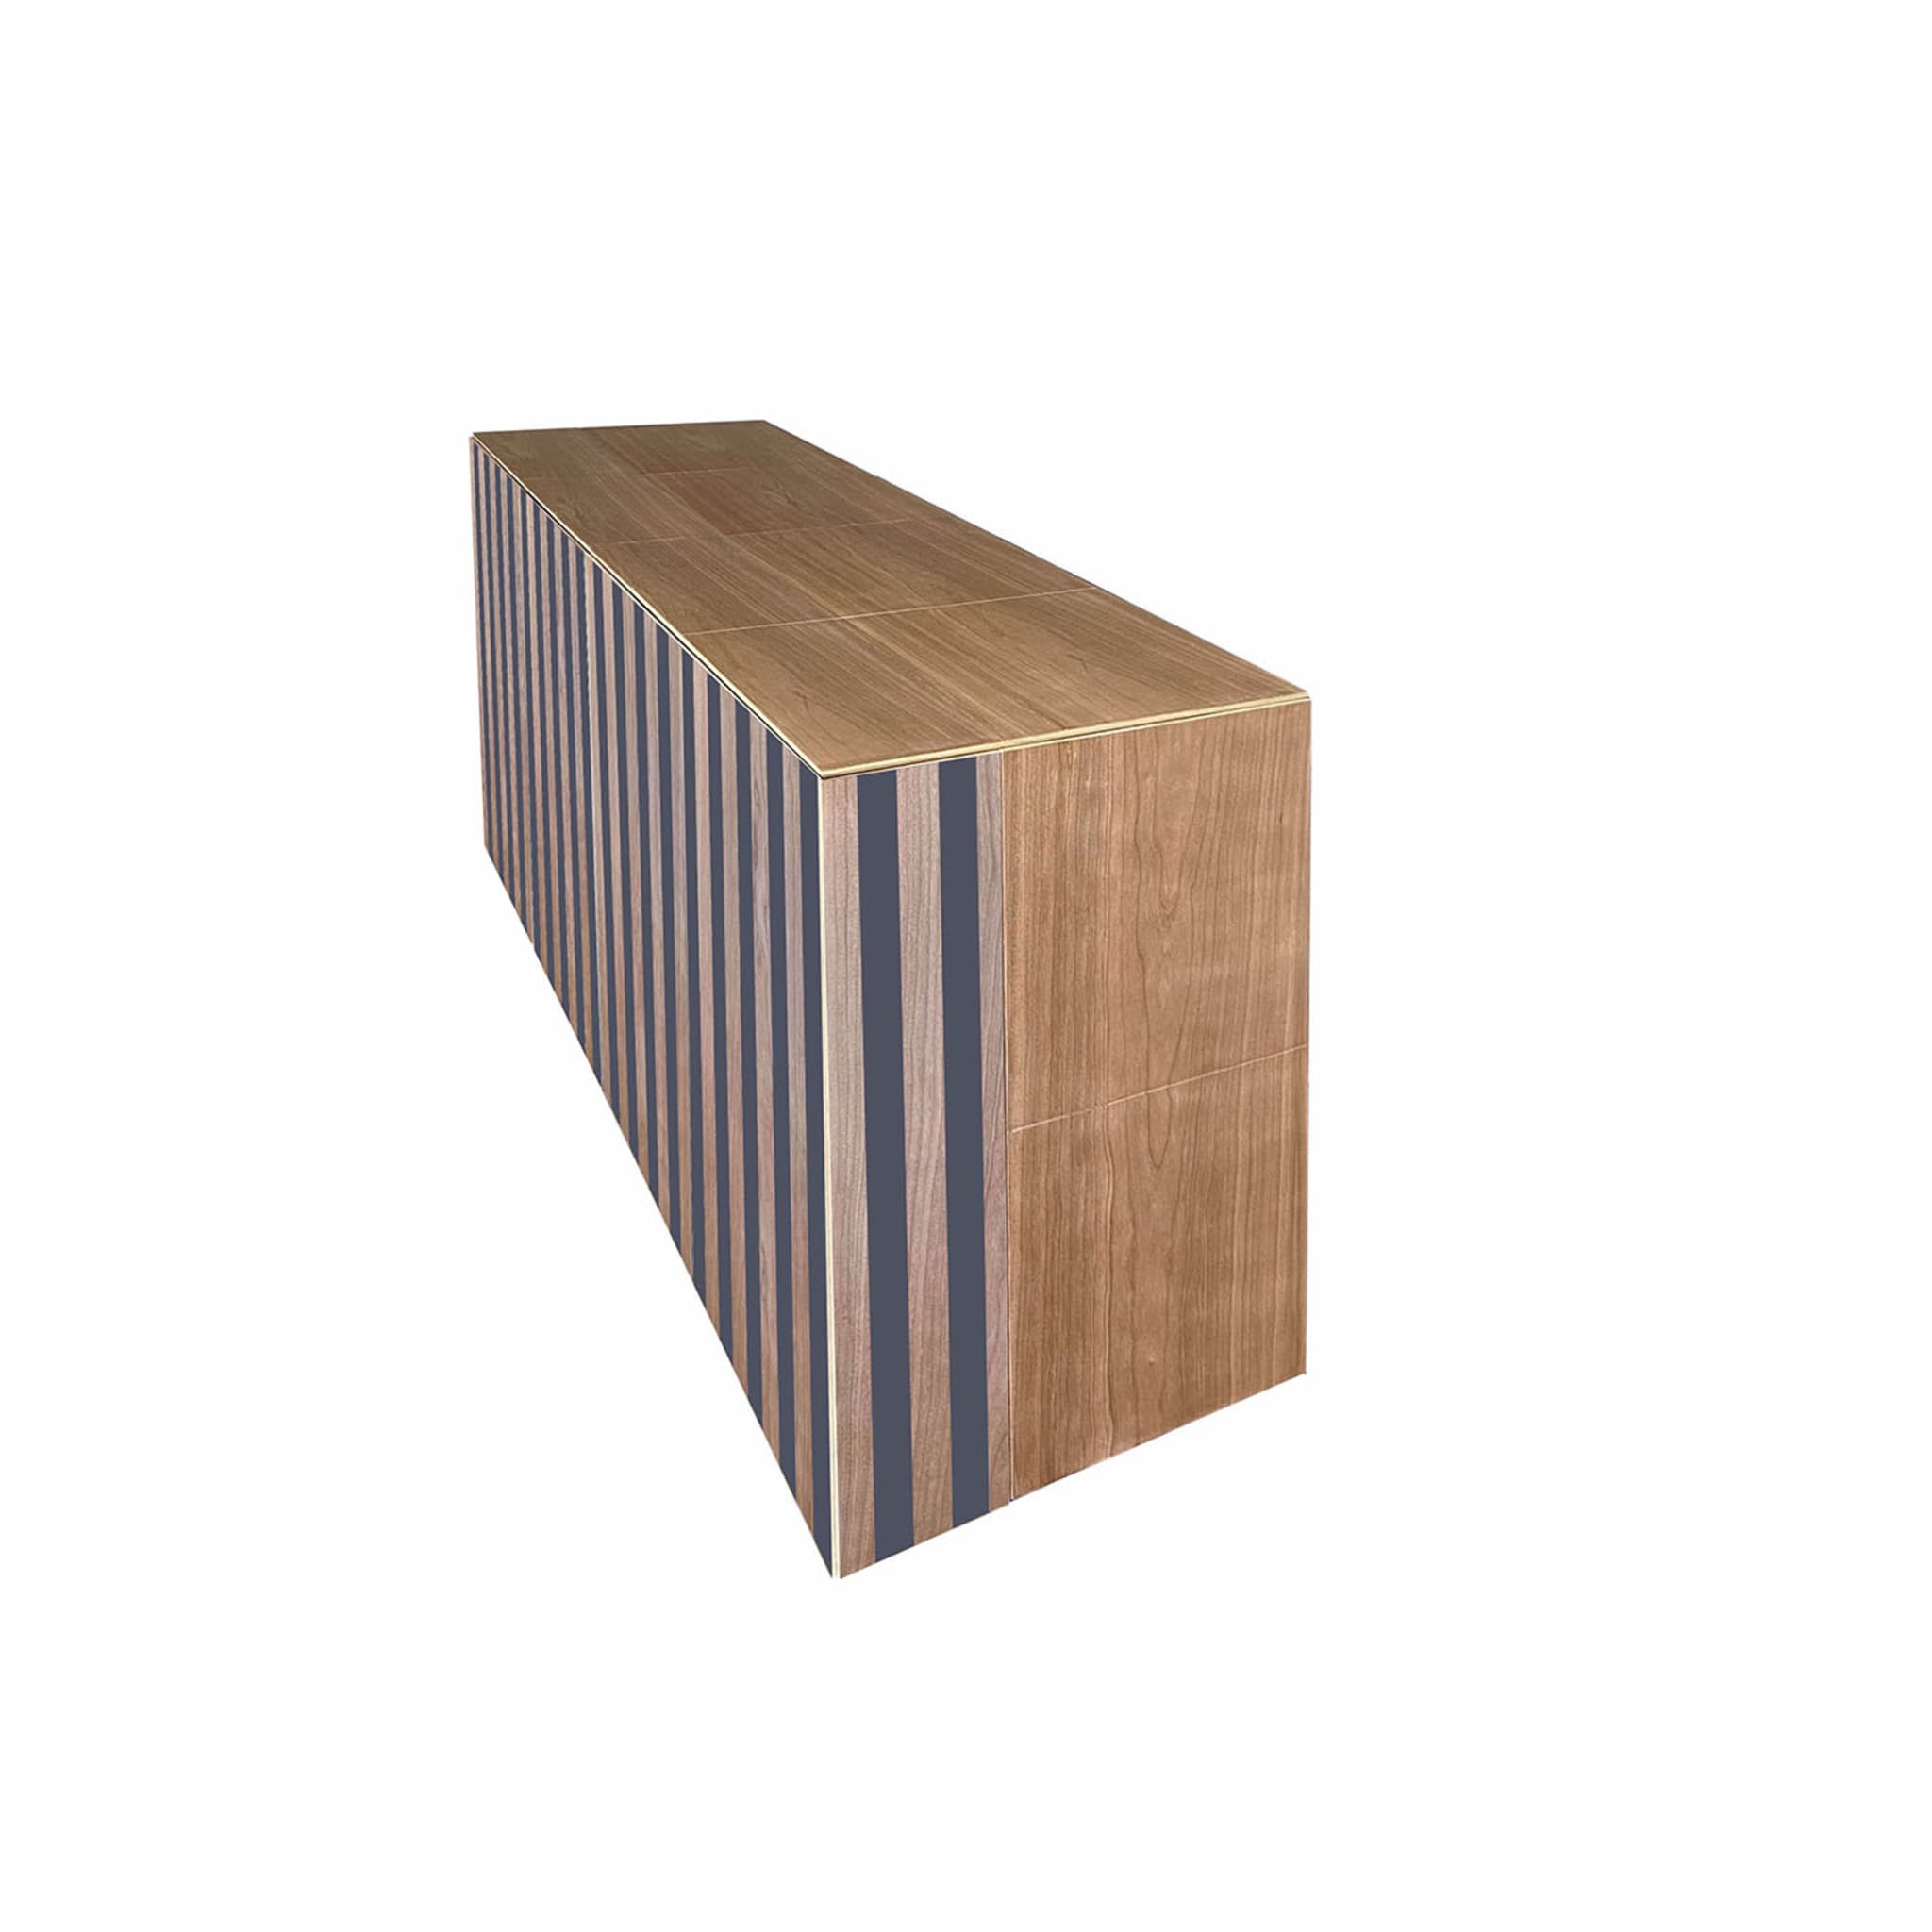 Md5 4-Door Striped Sideboard by Meccani Studio - Alternative view 2